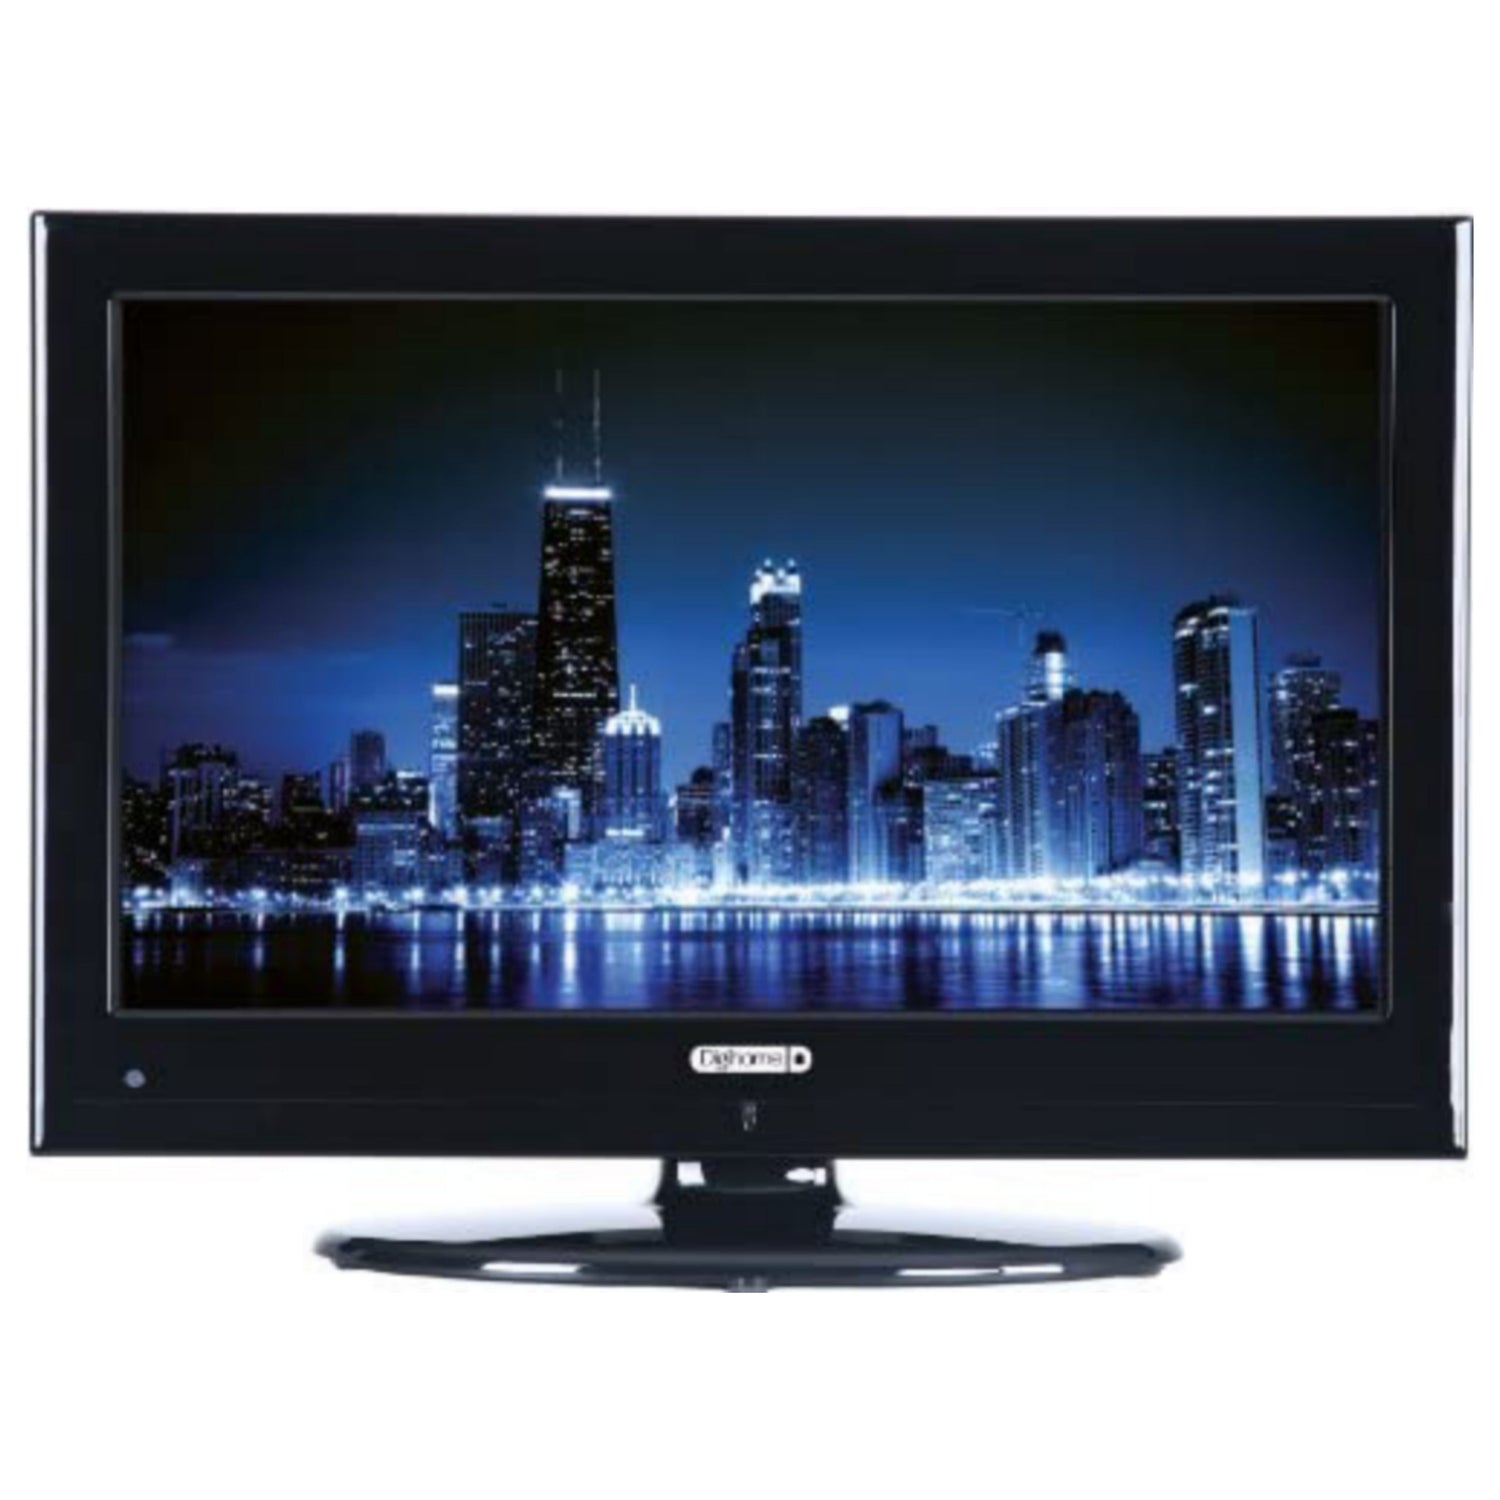 Digihome foreign used televisions